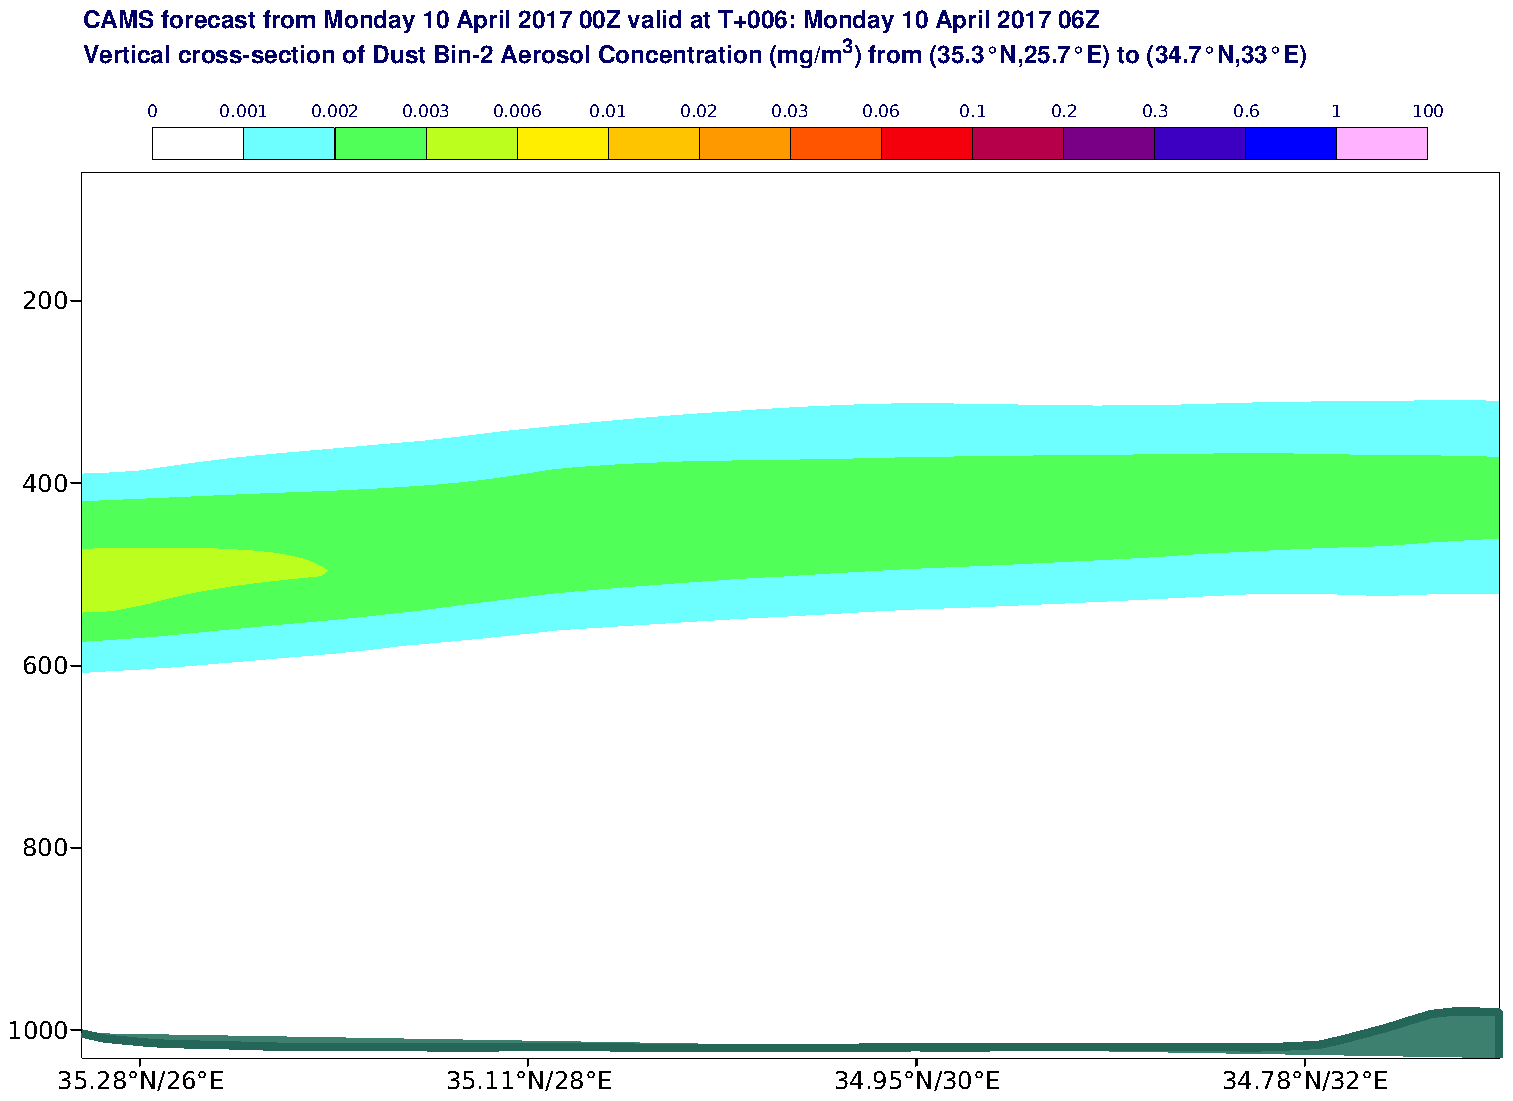 Vertical cross-section of Dust Bin-2 Aerosol Concentration (mg/m3) valid at T6 - 2017-04-10 06:00